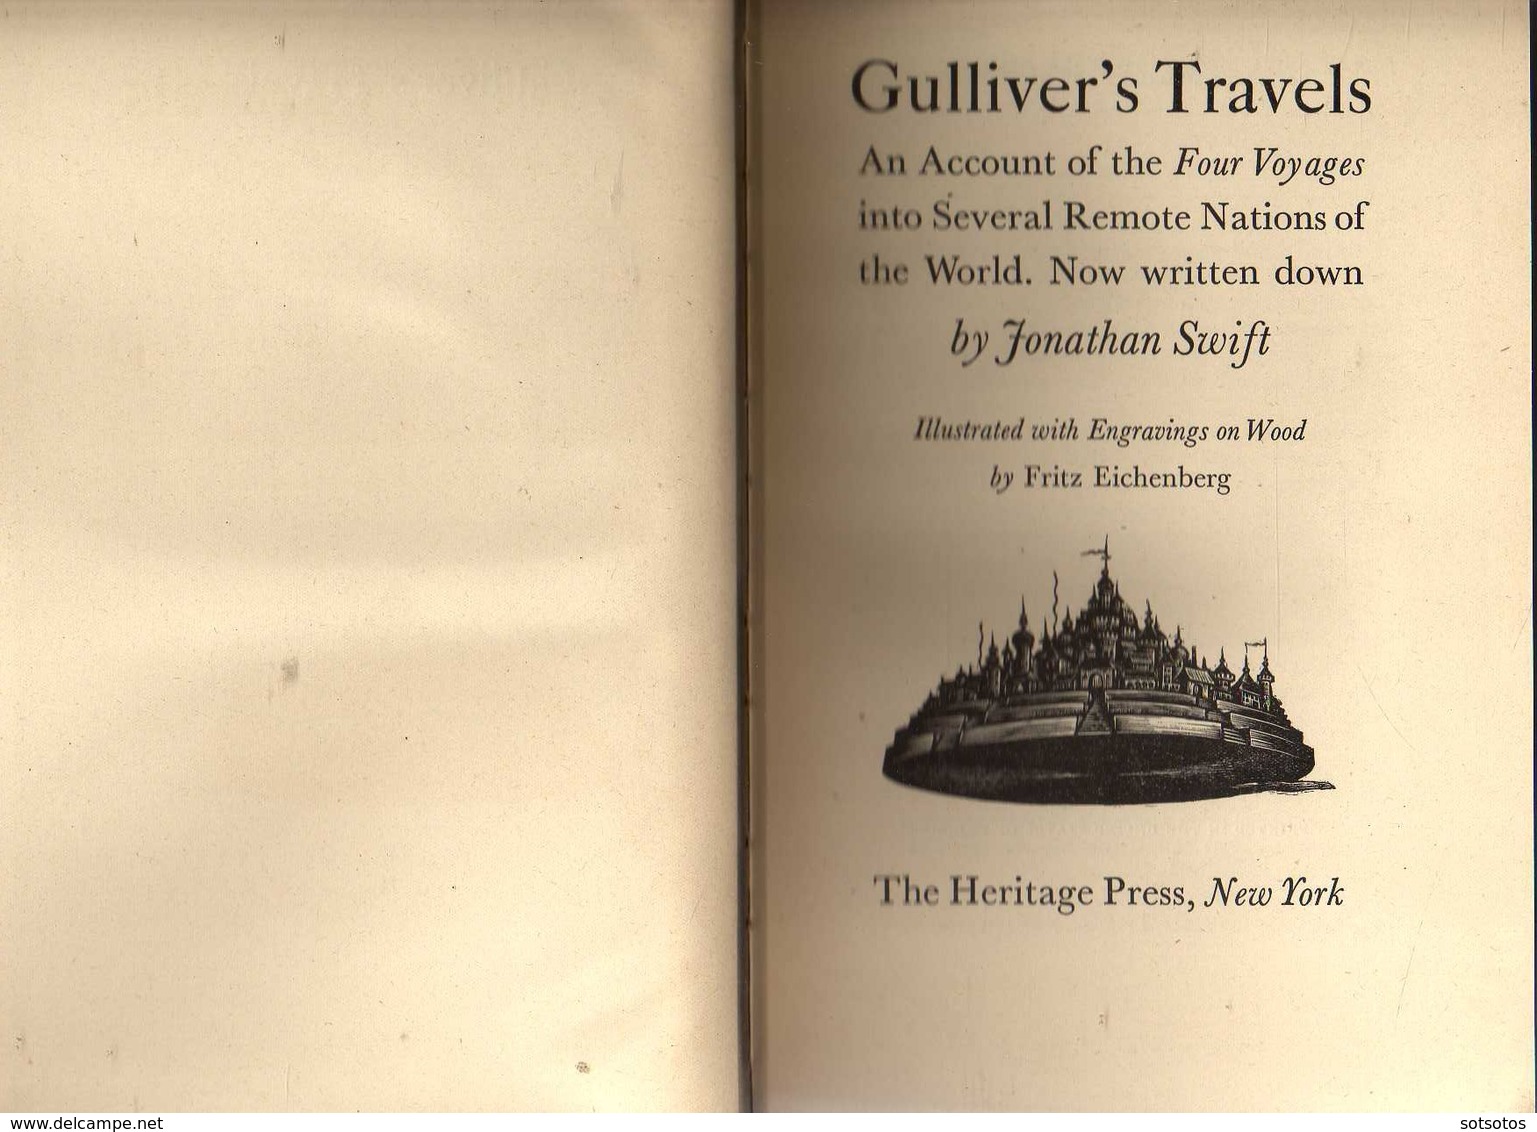 Gulliver's Travels an Account of the Four Voyages   into Several Remote Nations of the World. Now Written down by Jonath